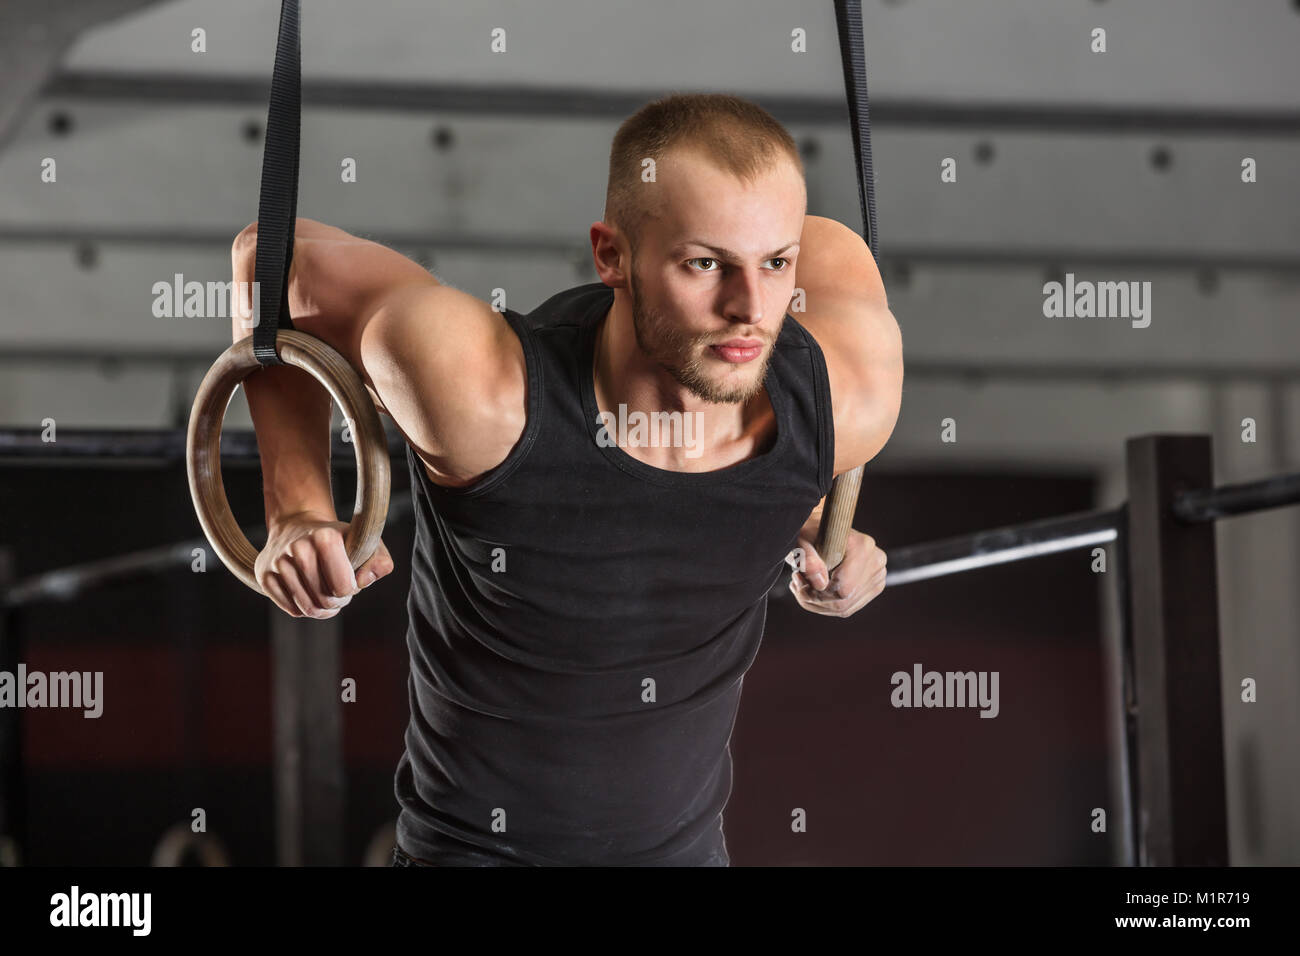 Portrait Of A Fitness Man Training Arms With Gymnastics Rings In The Gym Stock Photo